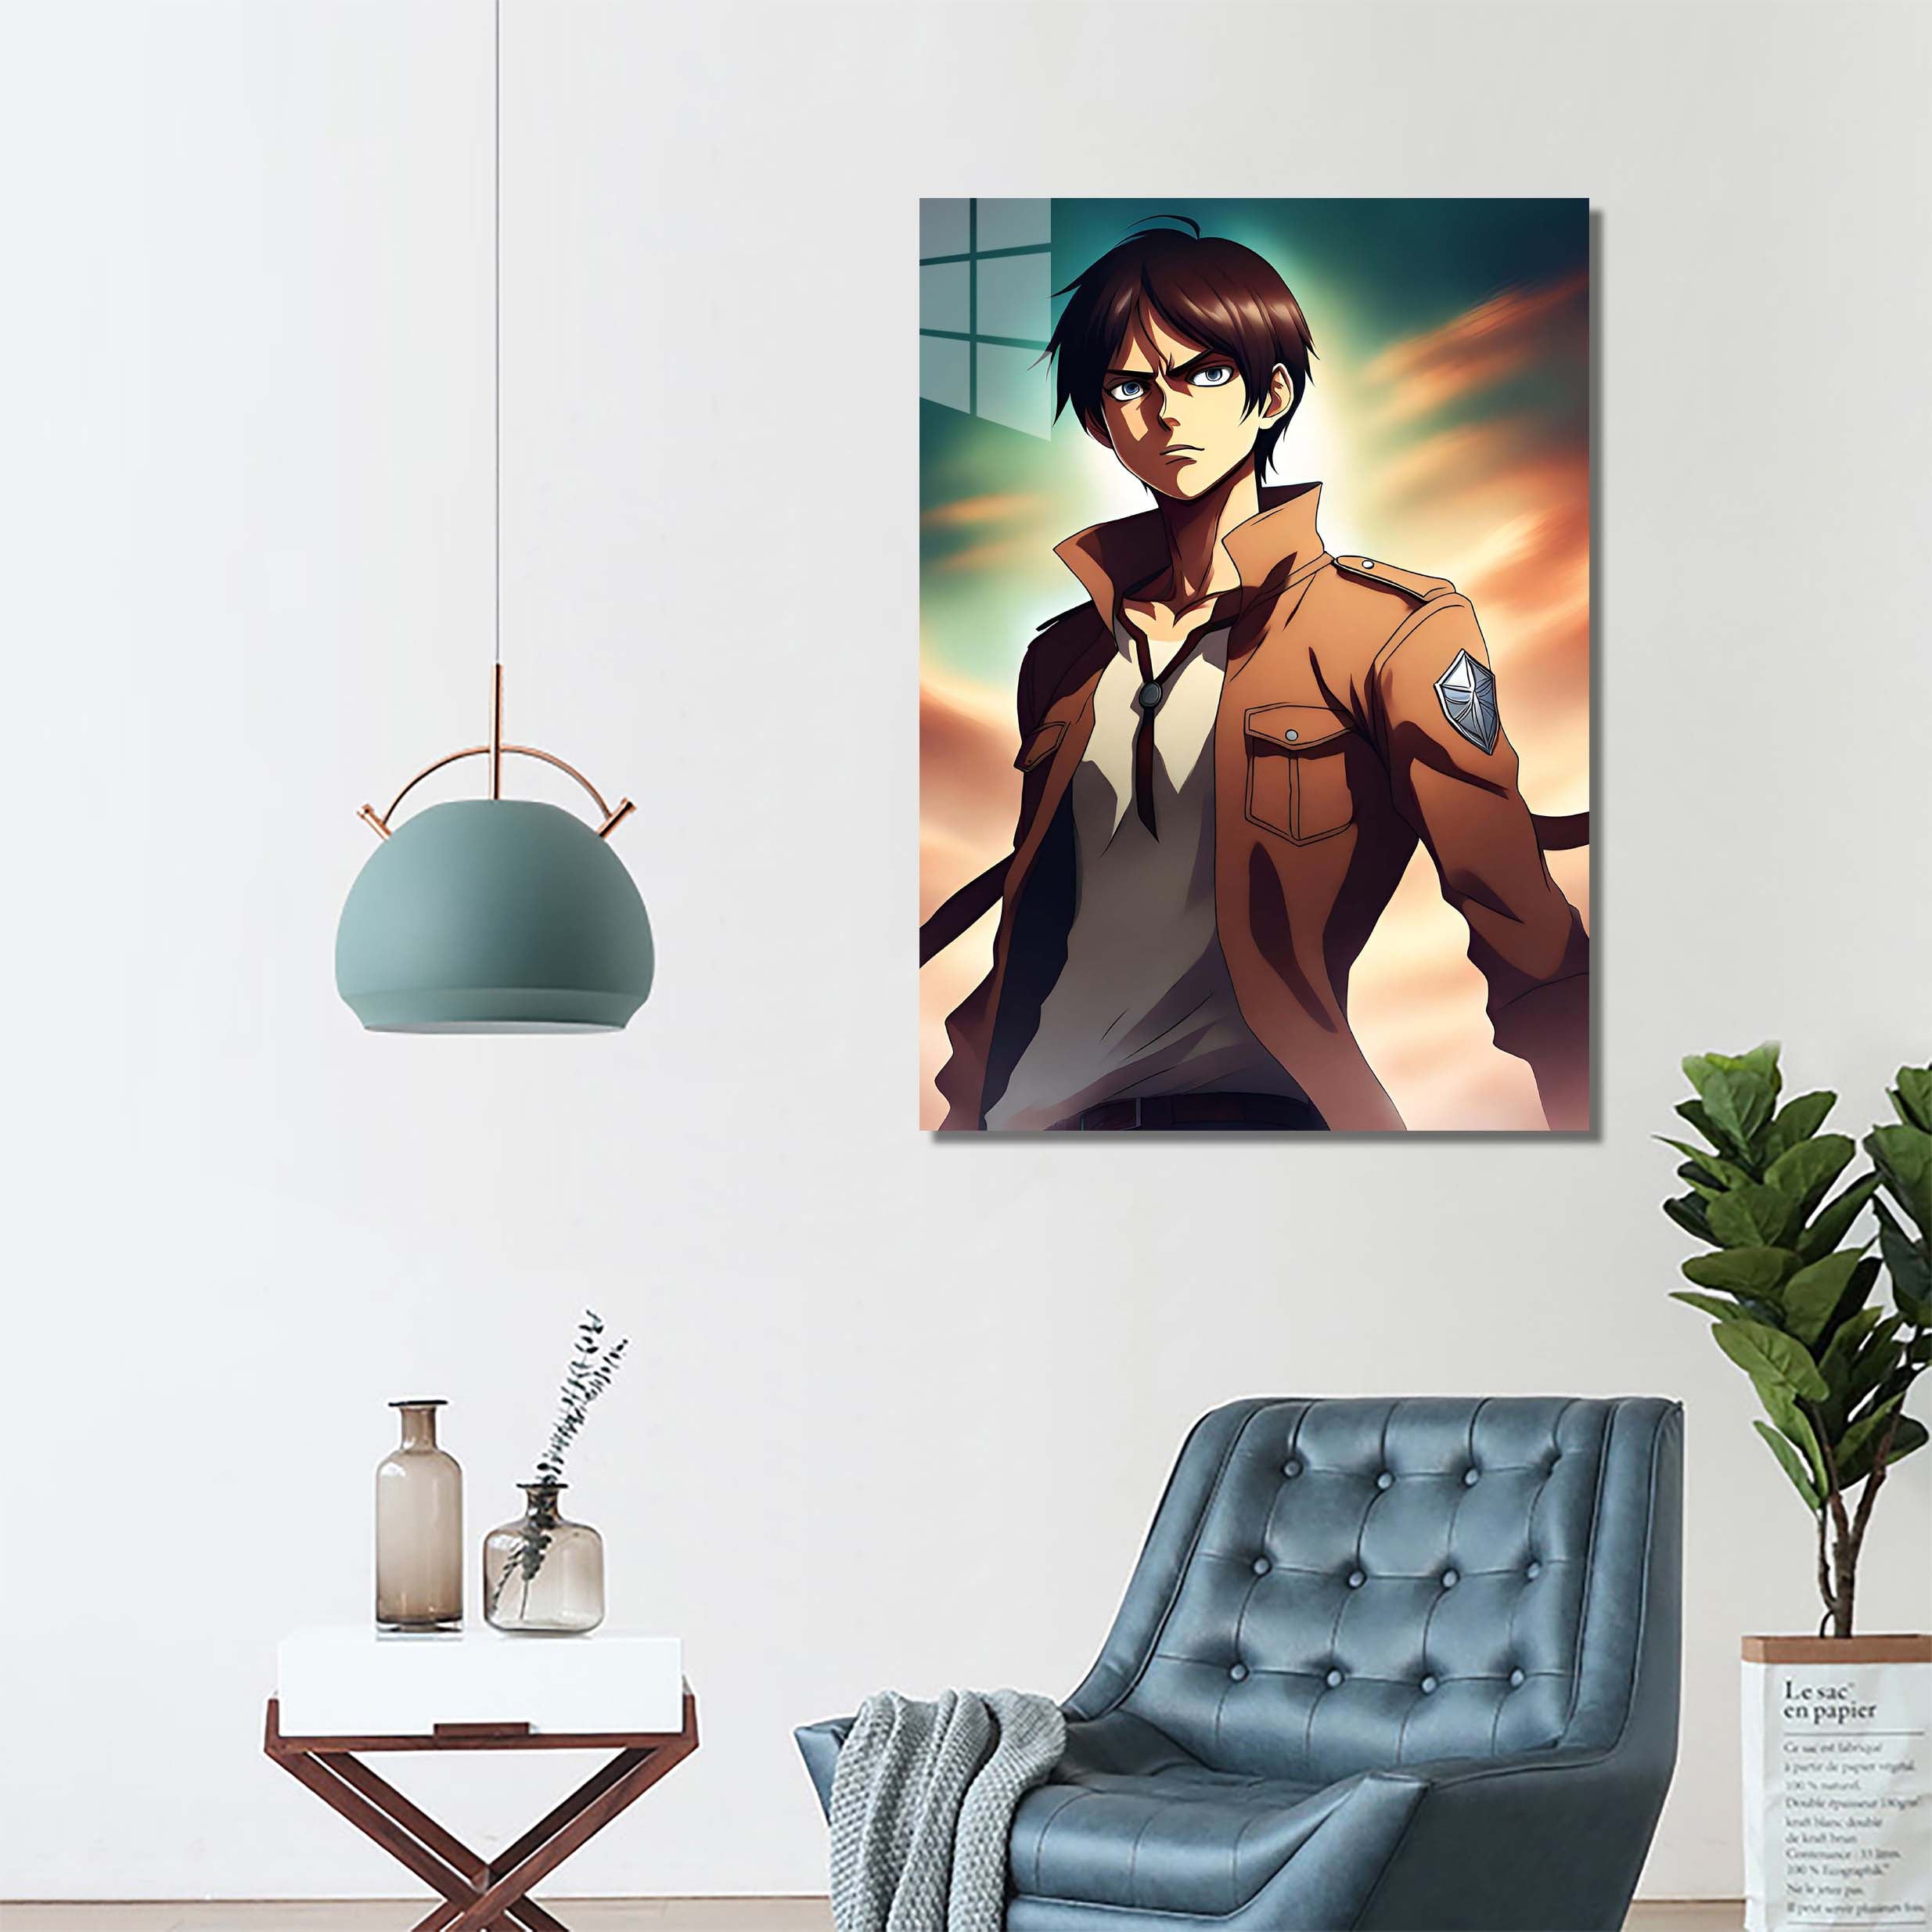 Attack On Titan art-designed by @DynCreative